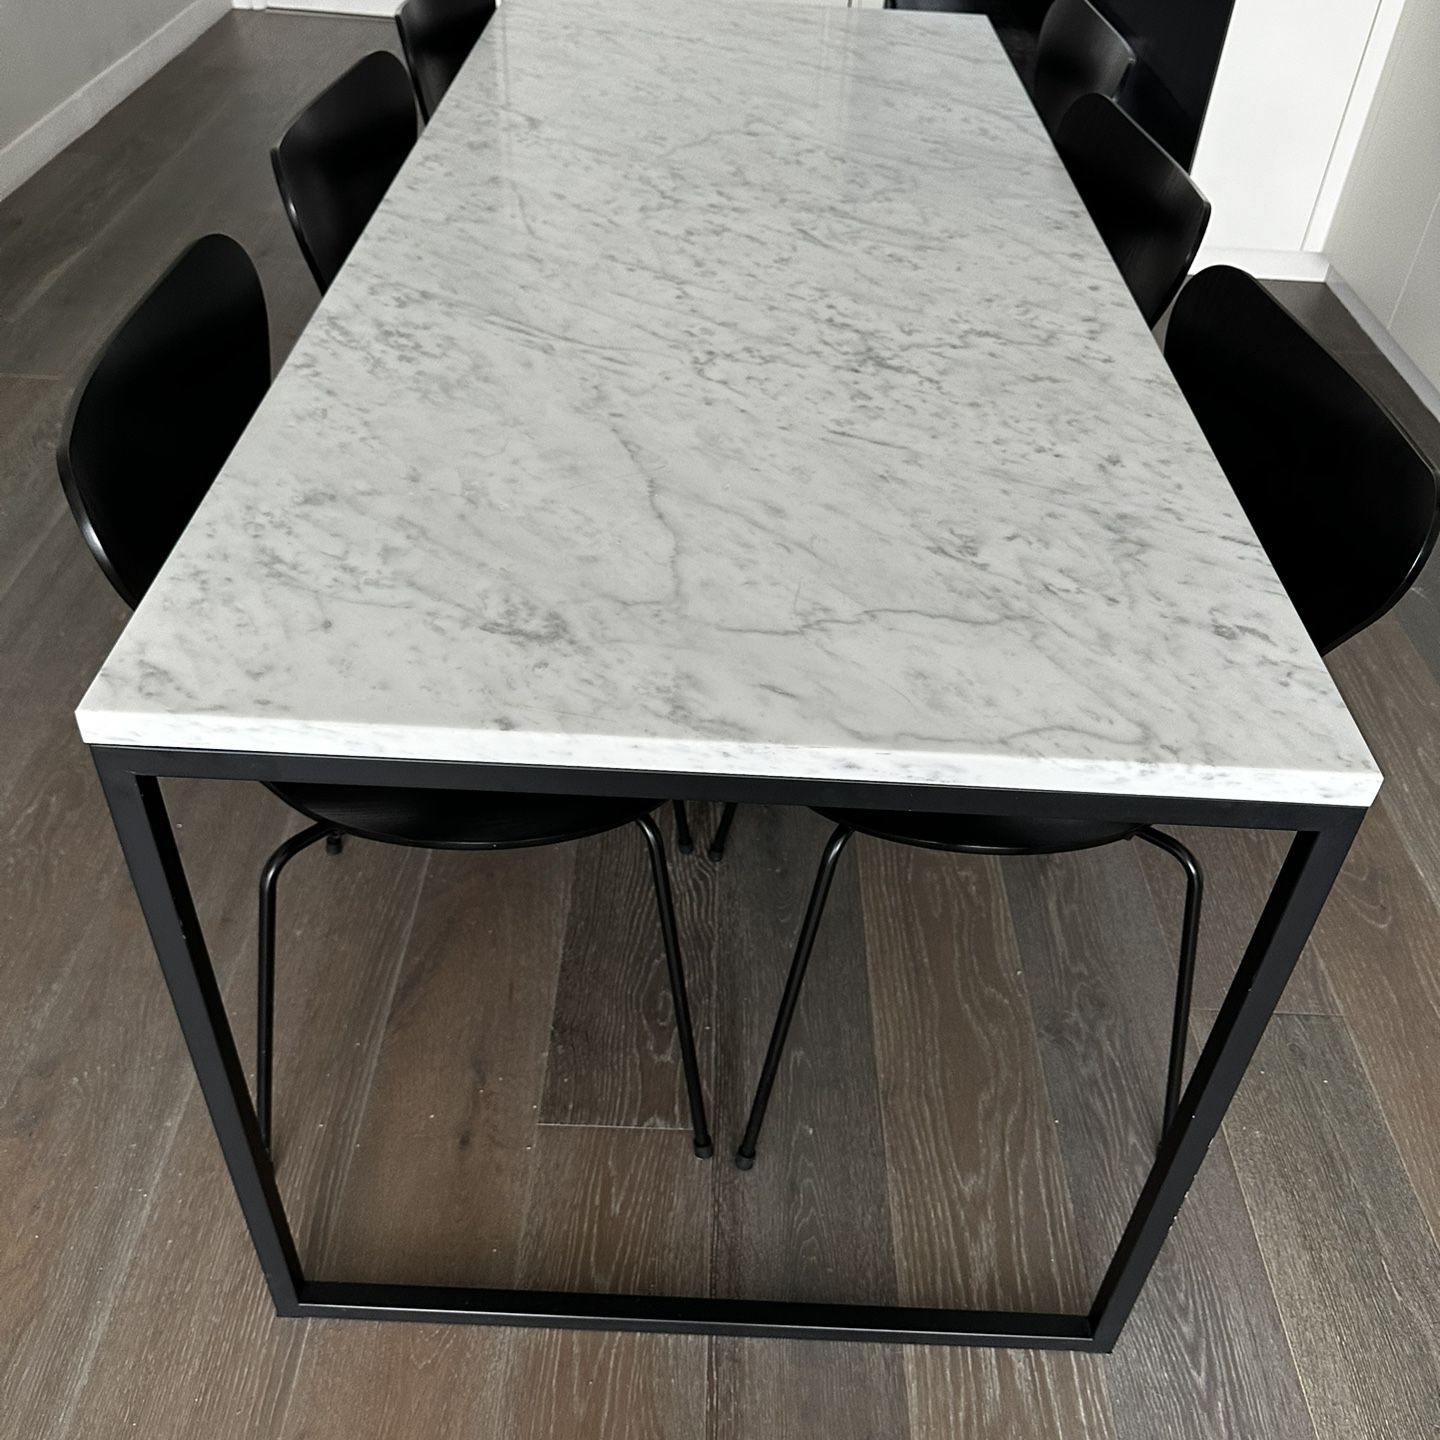 Italian Marble Table And Wood Chairs 